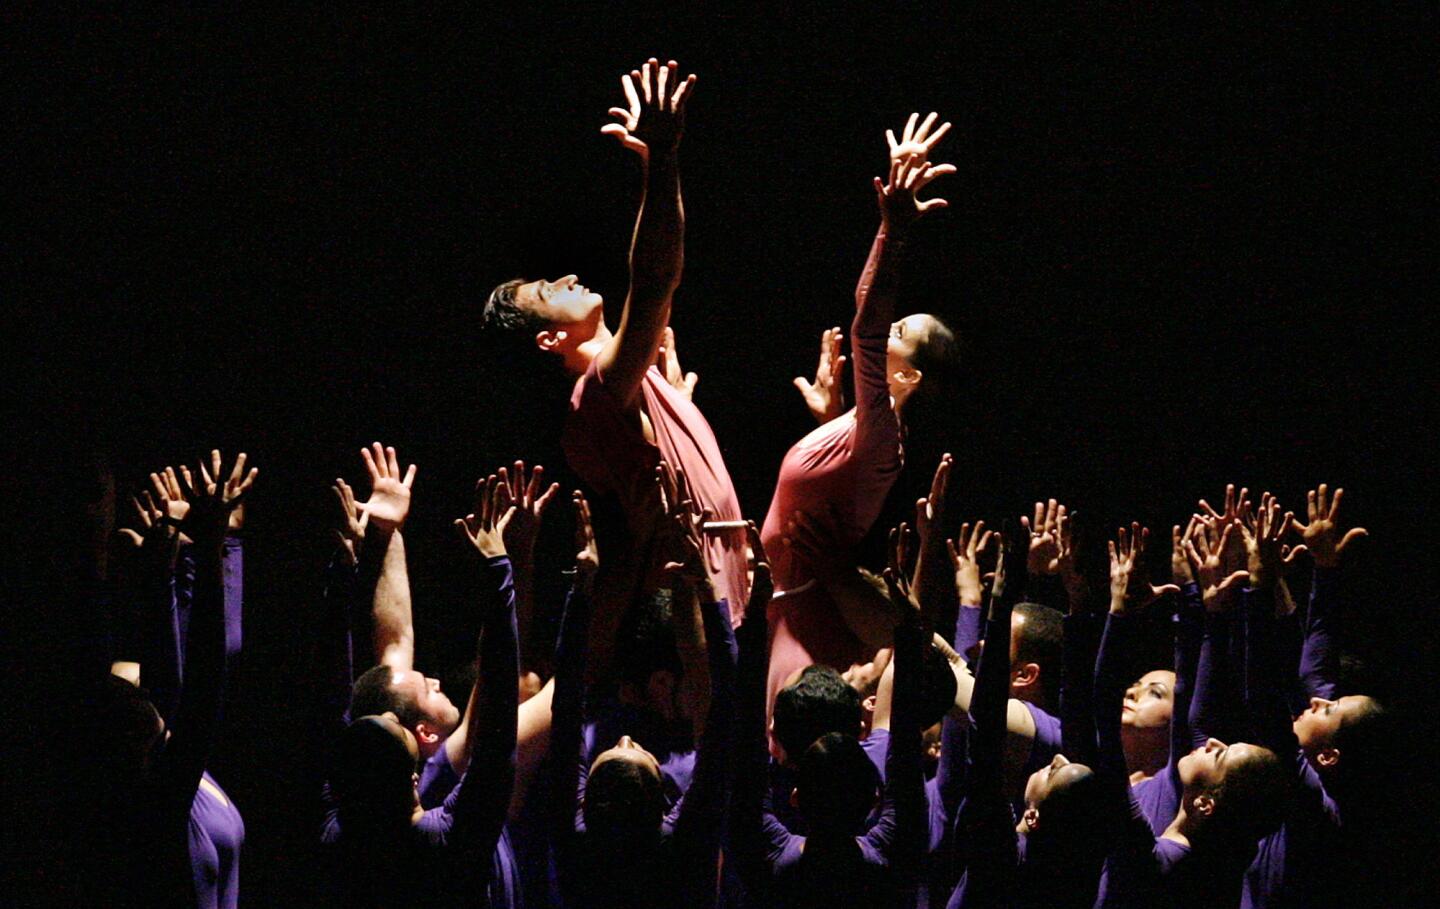 The conclusion of the second dance by Hamazkayin Ani Dance Company called Belfries are Sustained Forever at the Armenian Genocide Commemoration at the Alex Theatre in Glendale on Tuesday, April 24, 2012.